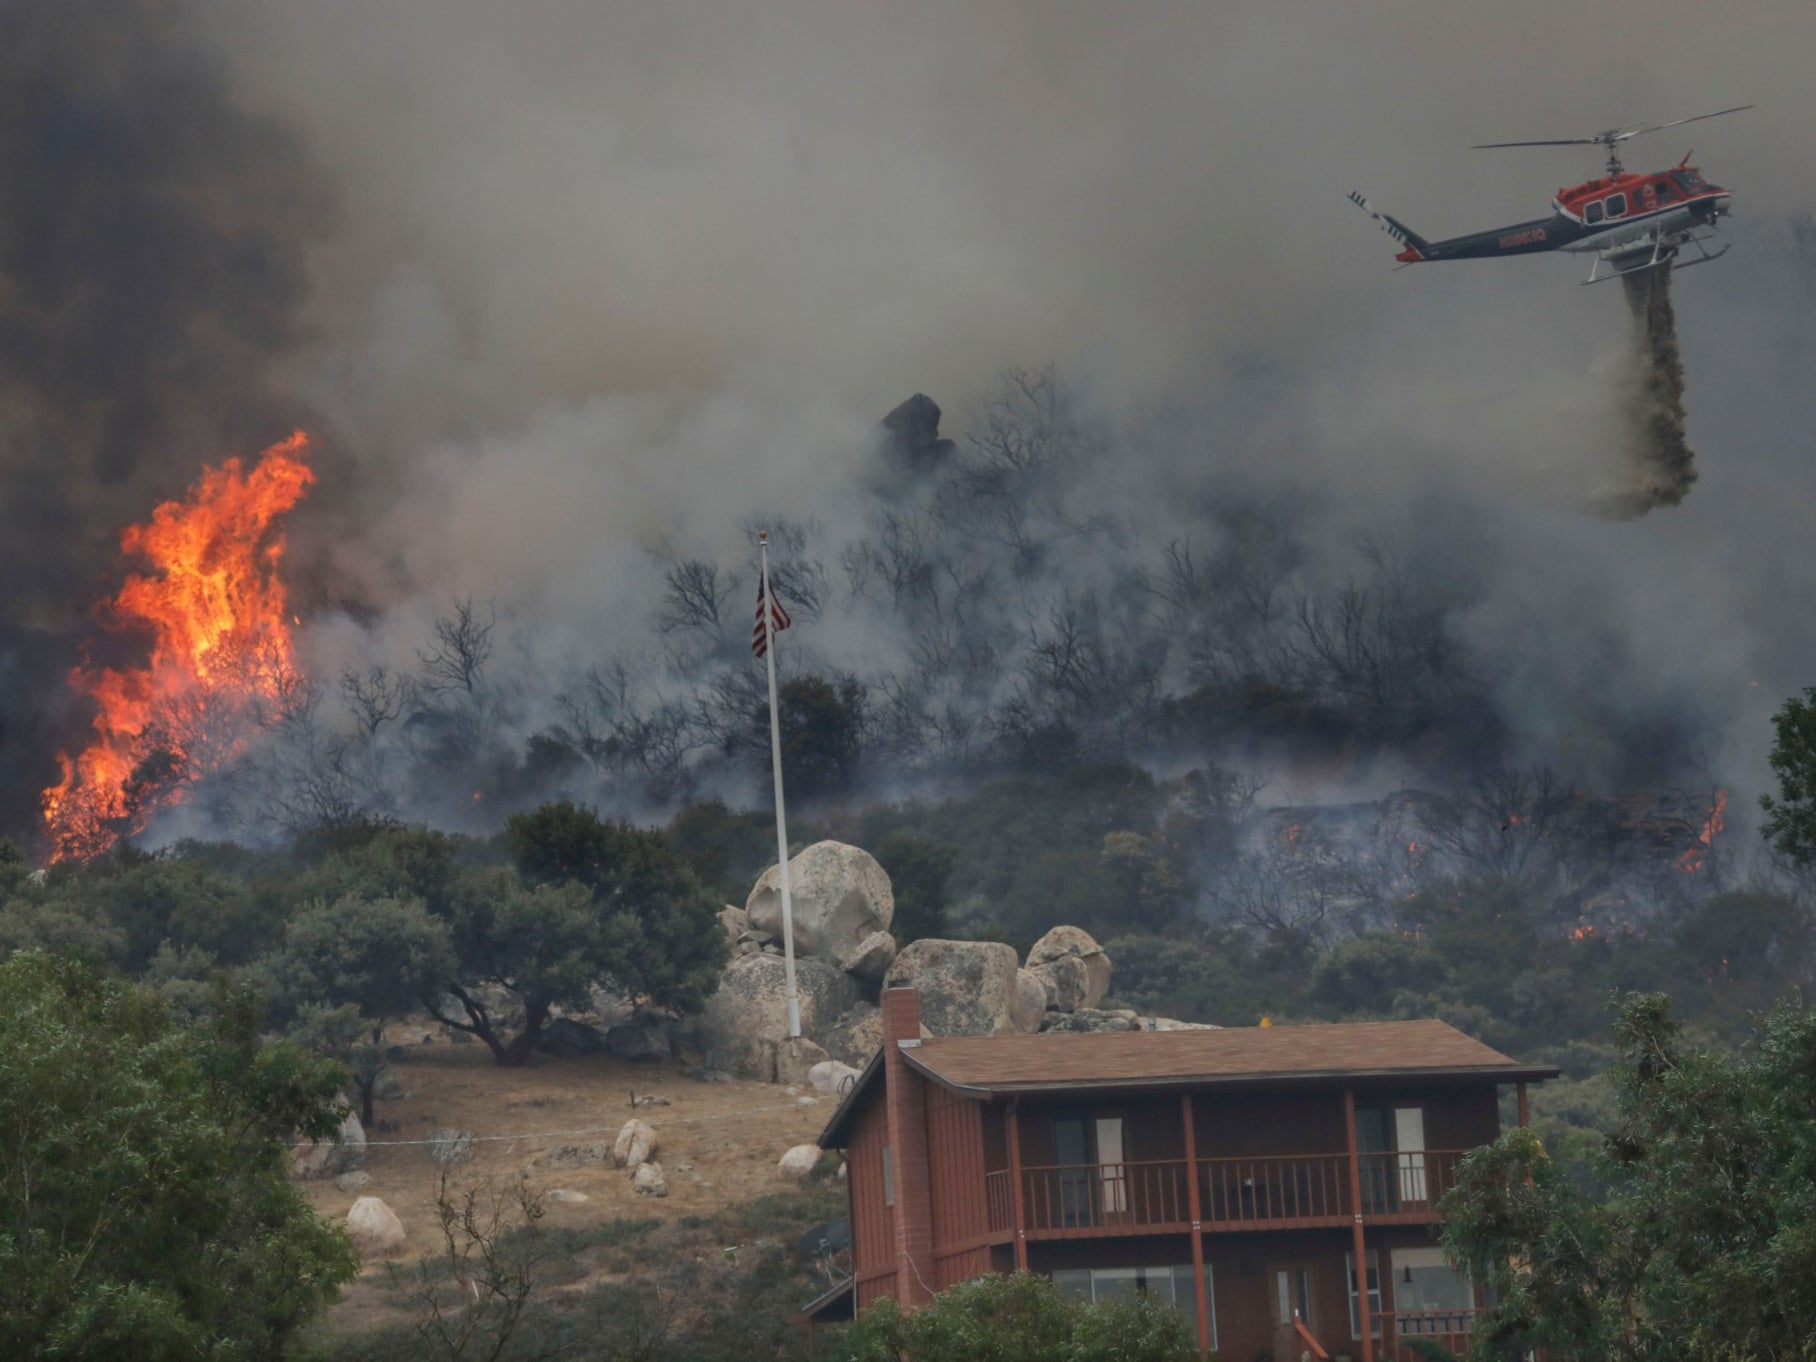 A brush fire encroaches along Japatul Road as a helicopter drops water during the Valley Fire in Jamul, California